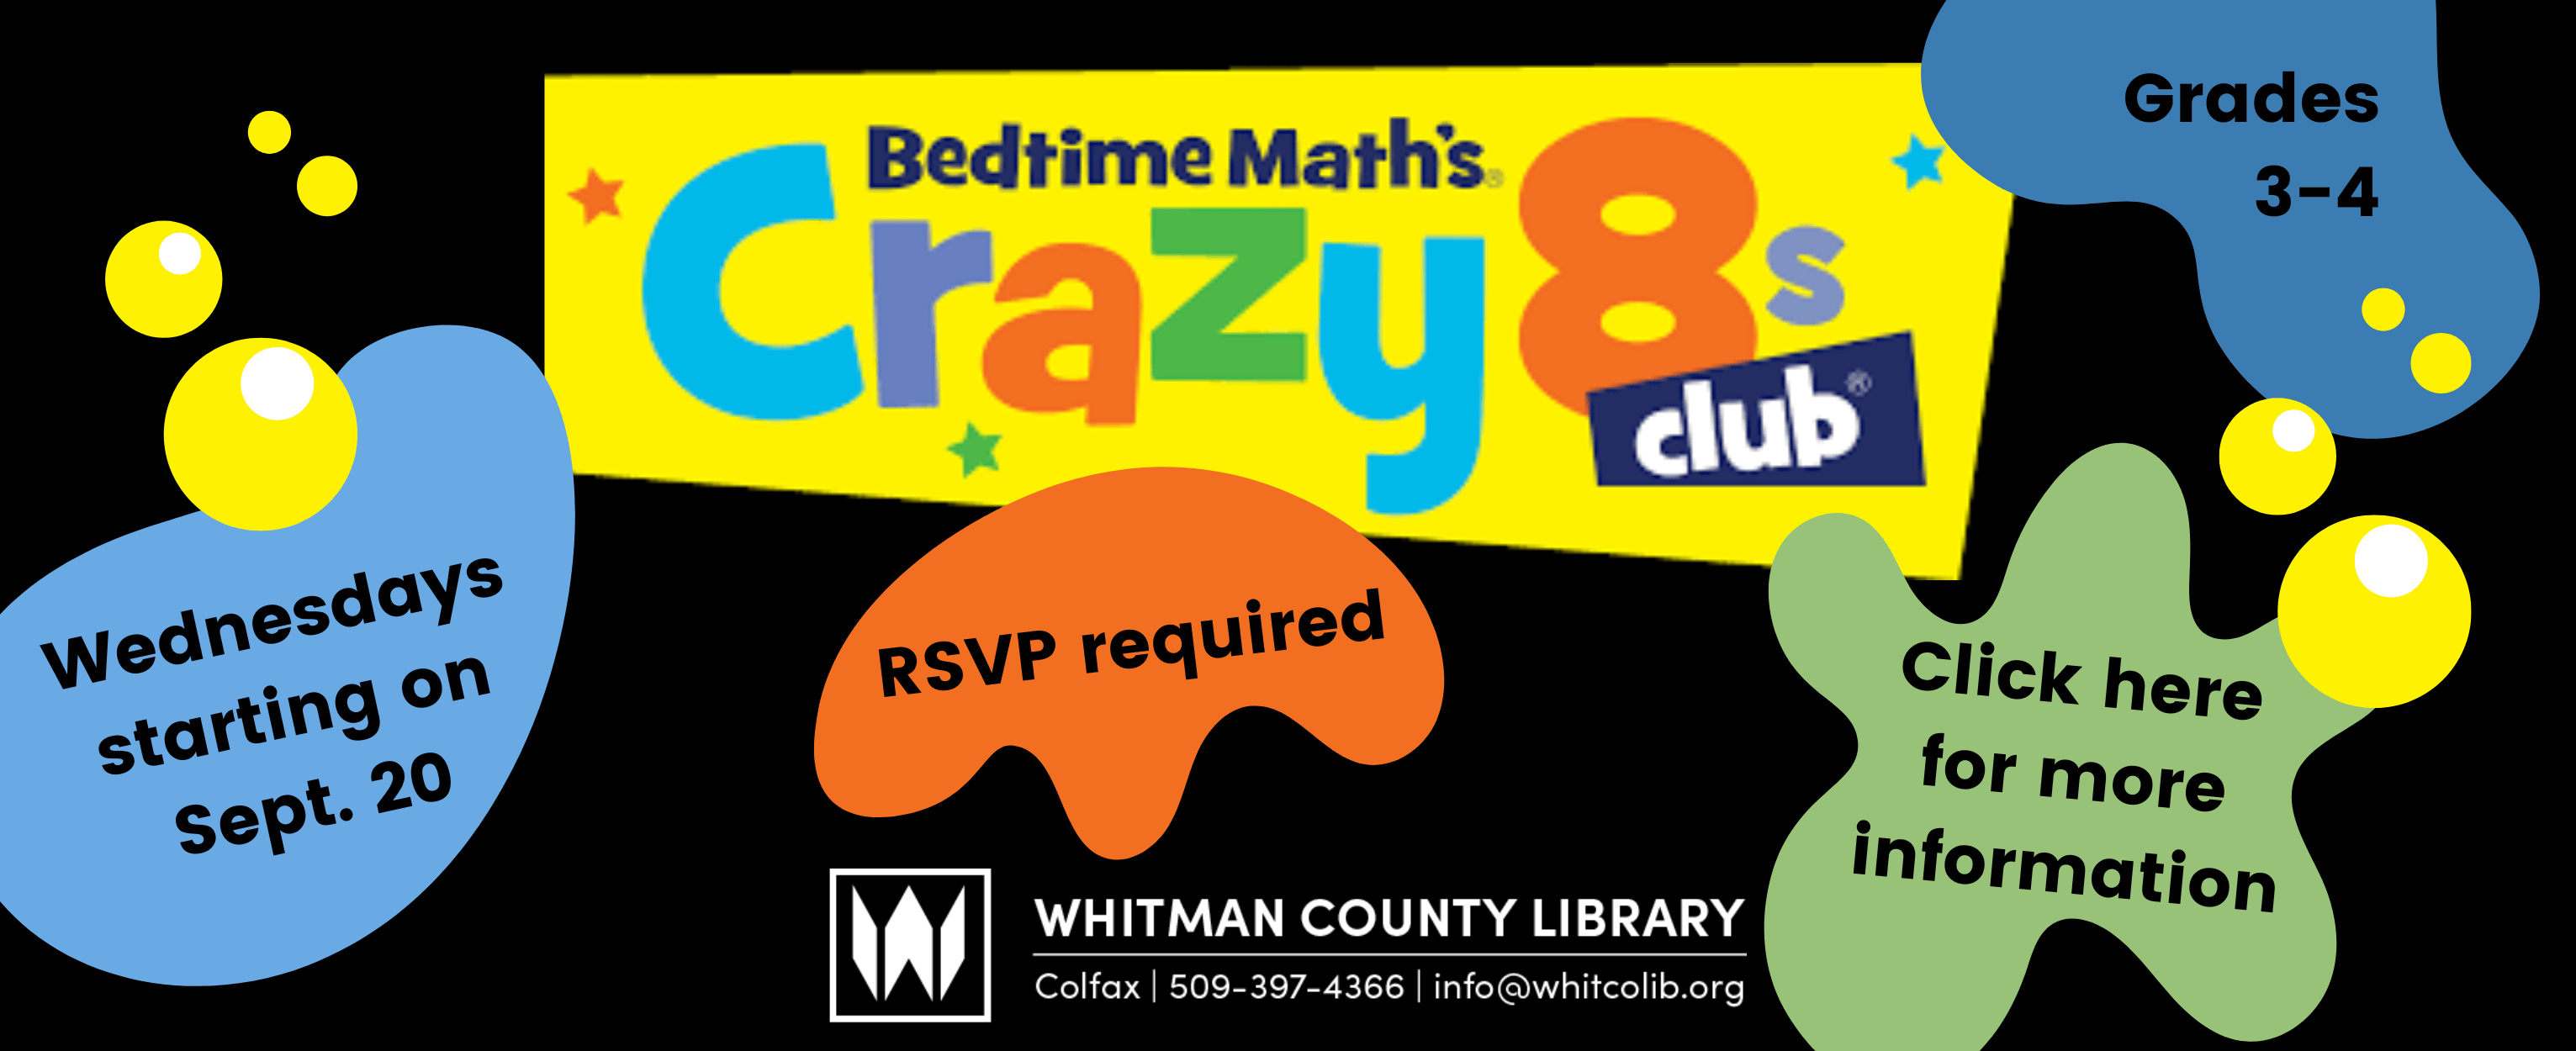 RSVP for Crazy 8's Math Club today! Every Wednesday beginning on Sept. 20 and for kids grades 3-4.